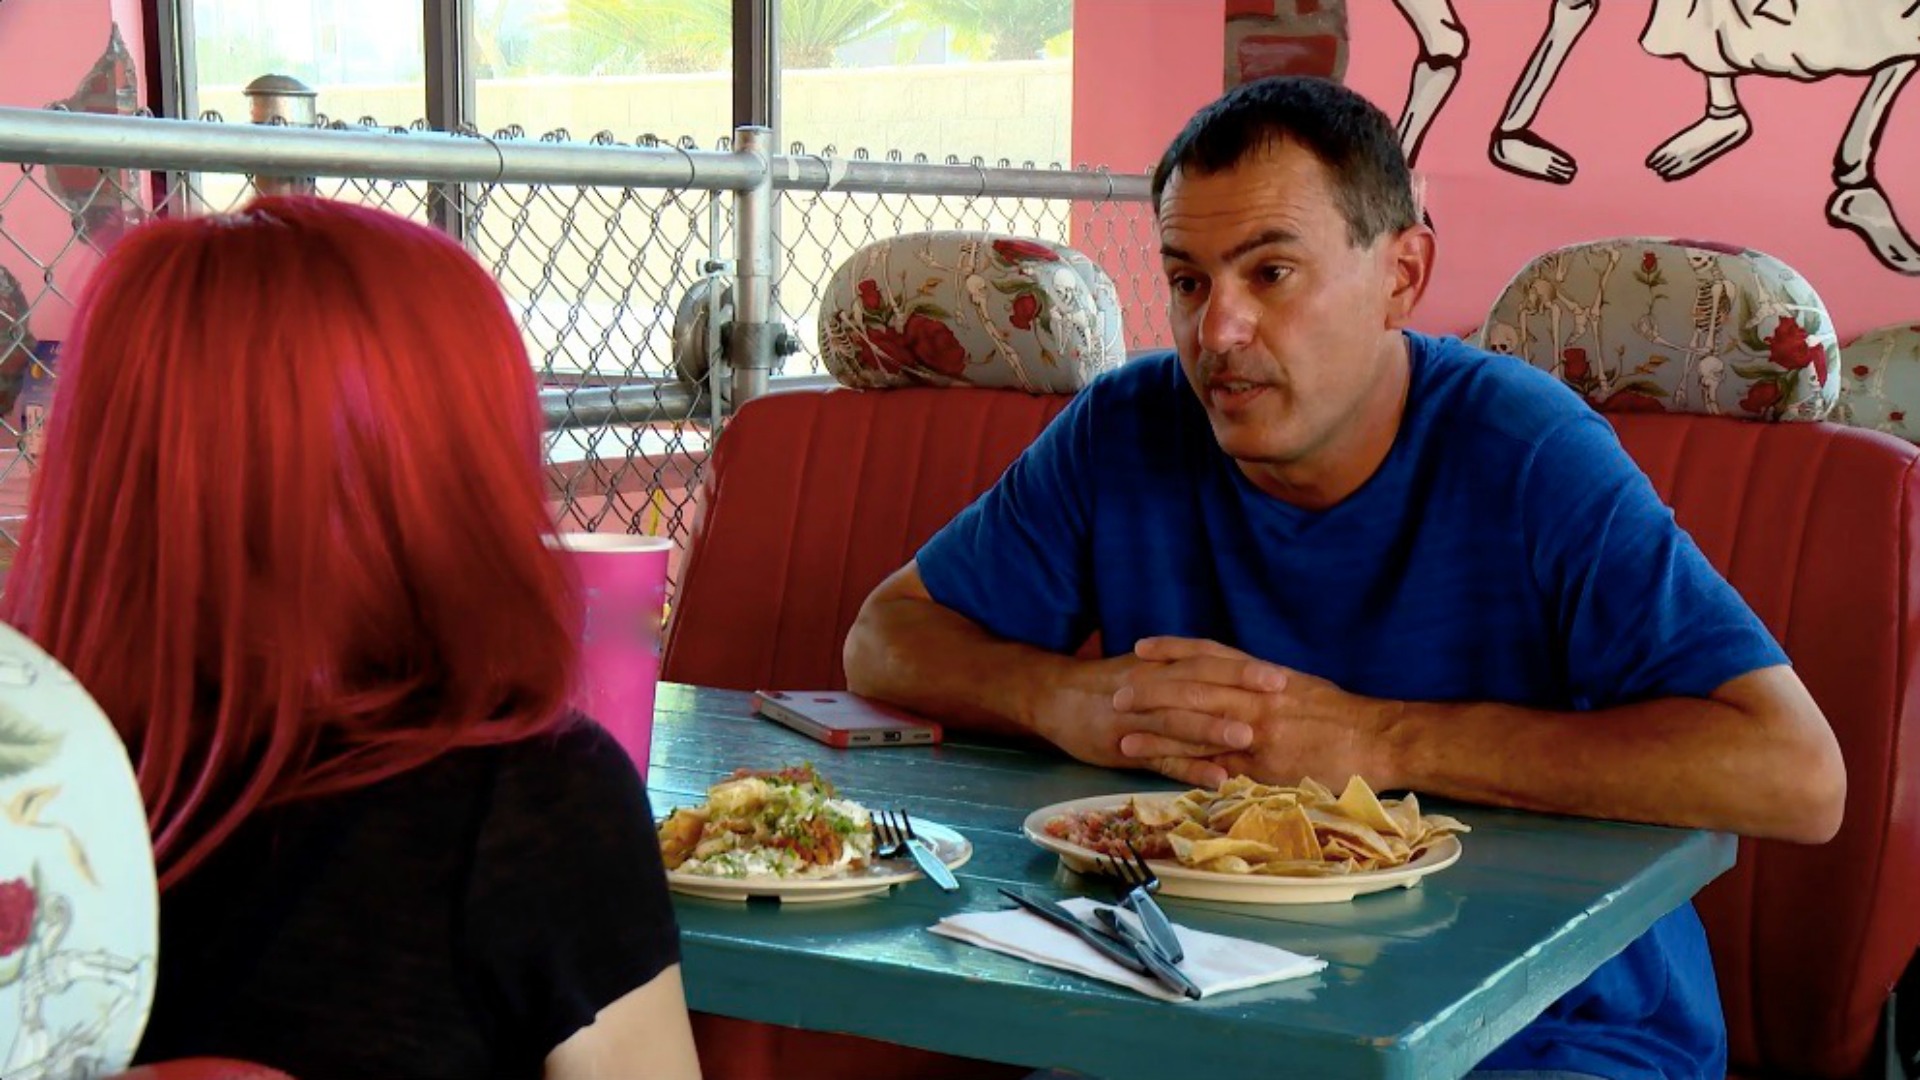 Watch Sneak Peek: These Couples Are at a Breaking Point! | Life After Lockup Video Extras